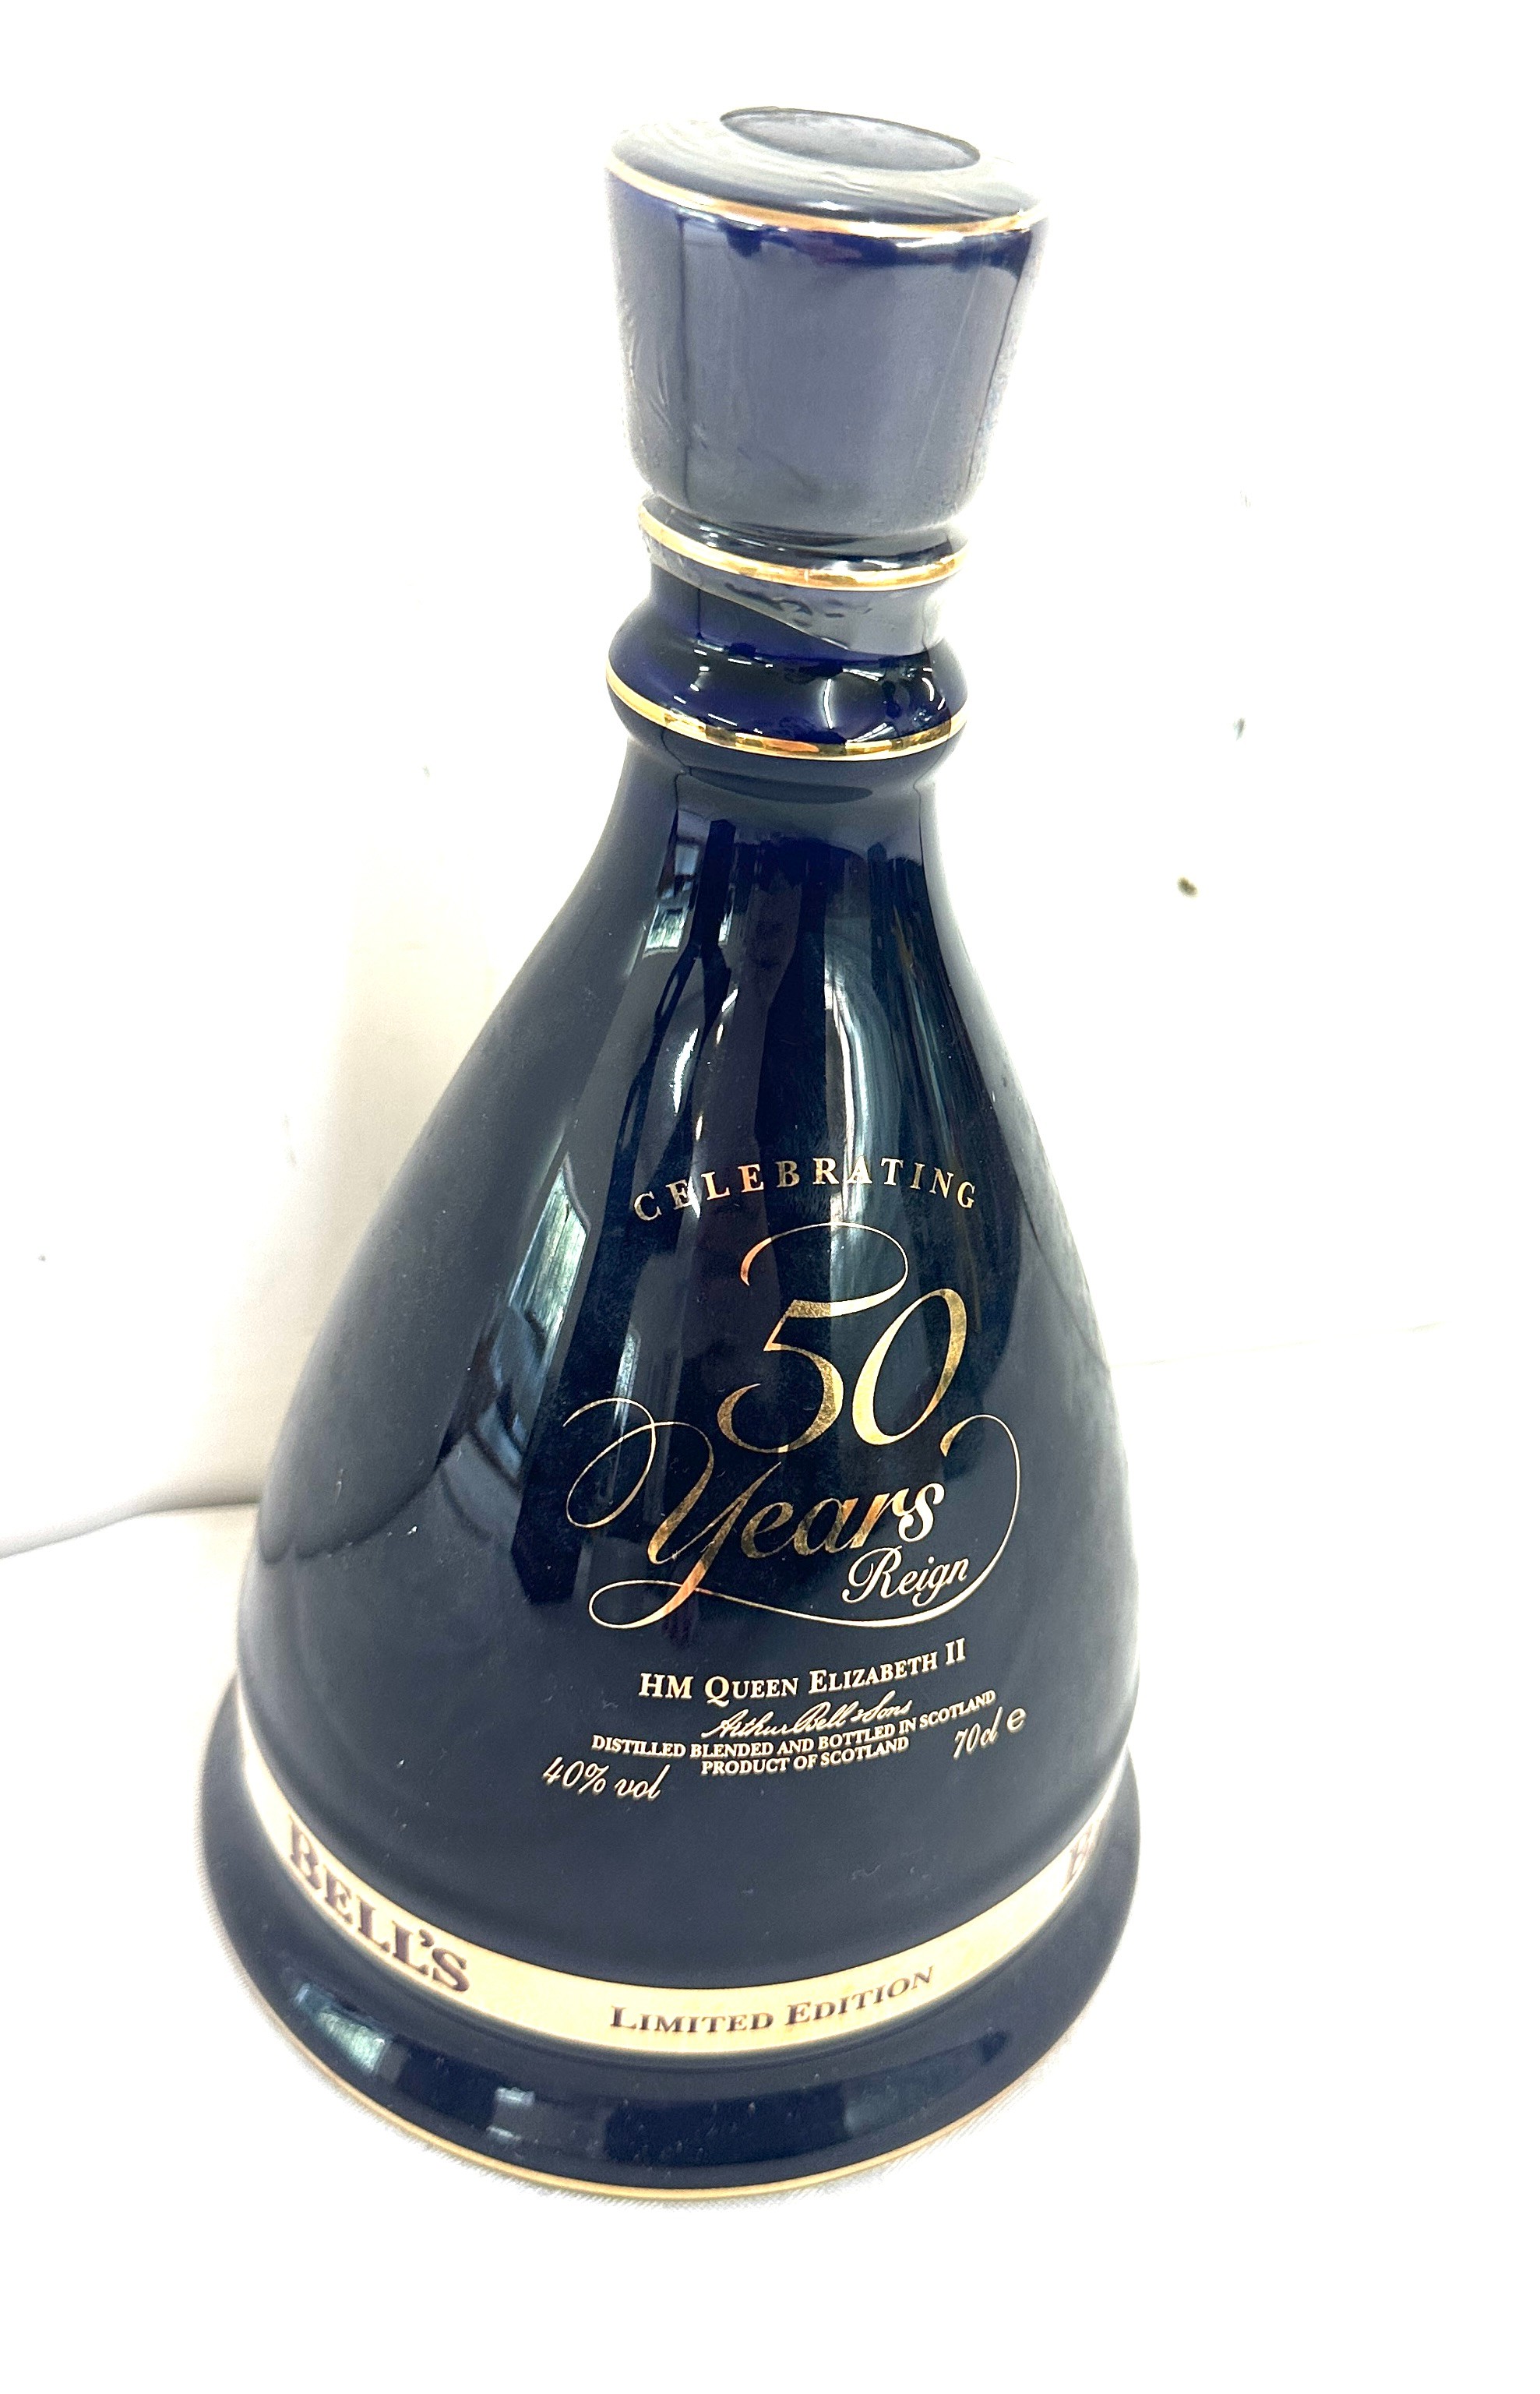 Bell's Celebrating 50 Years Reign HM Queen Elizabeth II Extra special old Scotch whisky decanter - Image 5 of 6